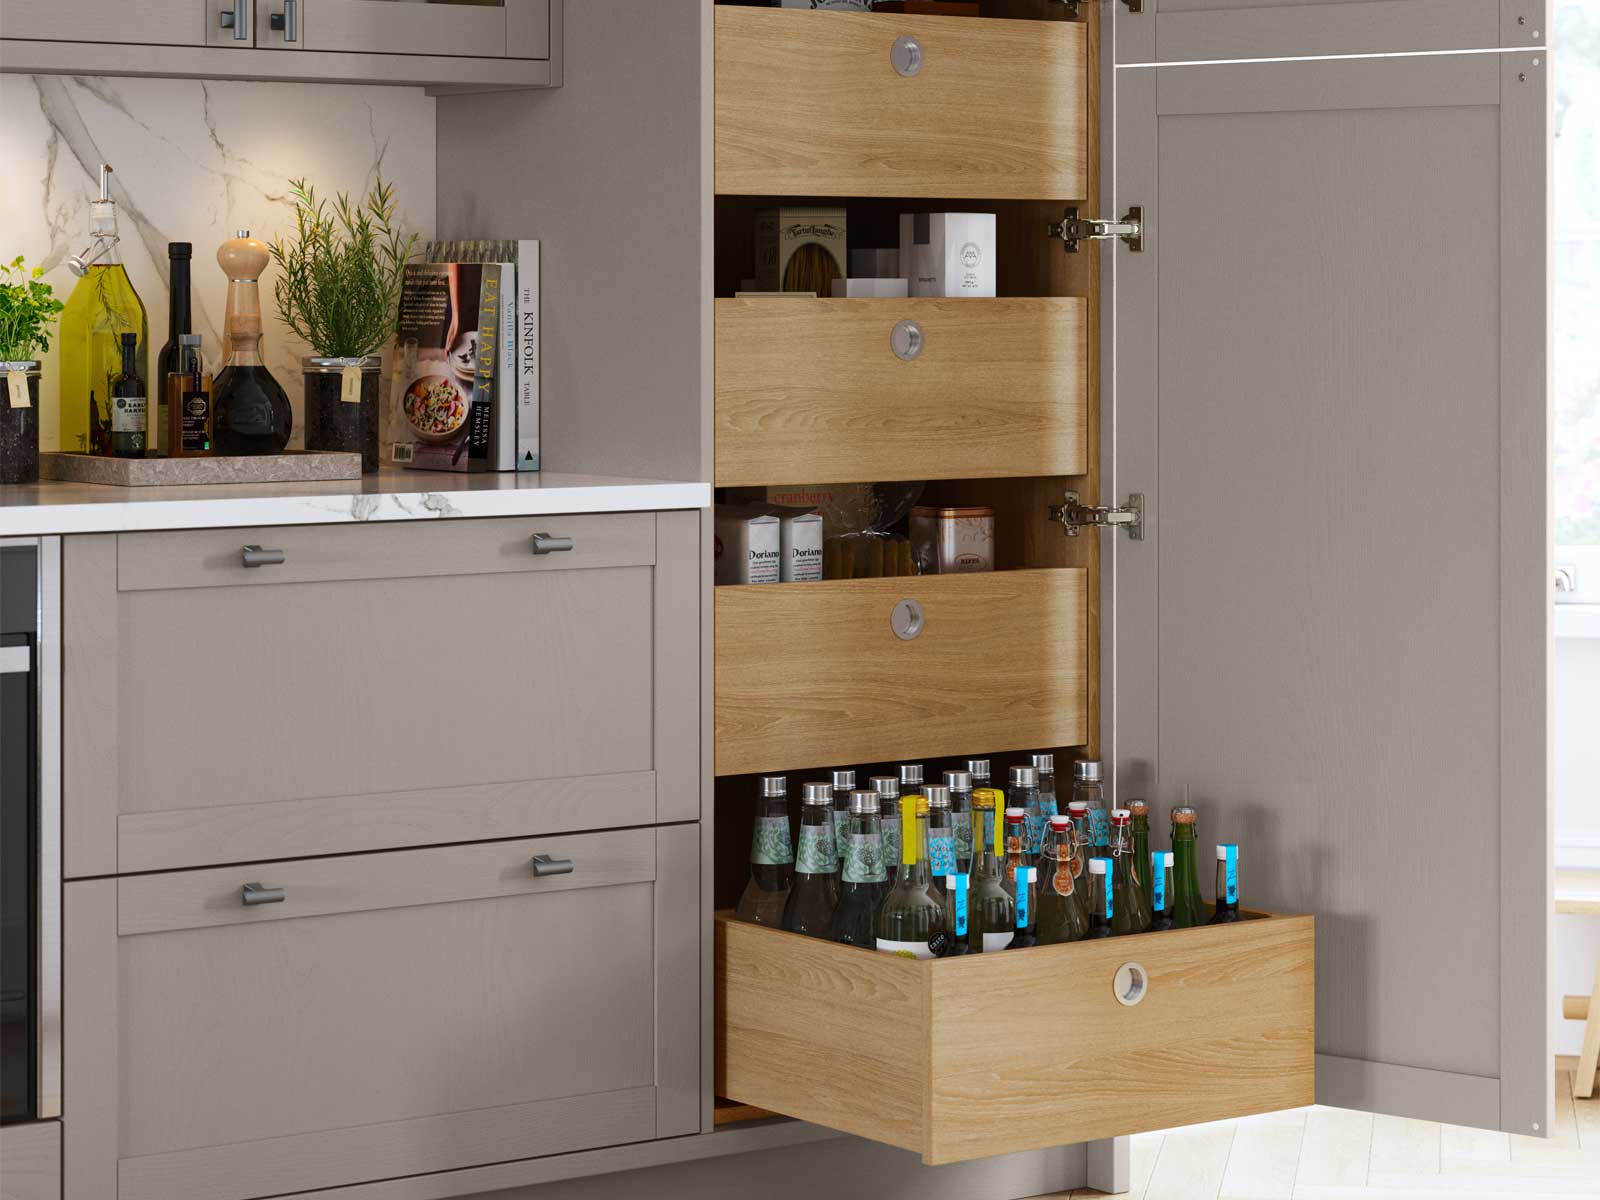 The larder cabinet with kitchen unit pull-out storage drawers